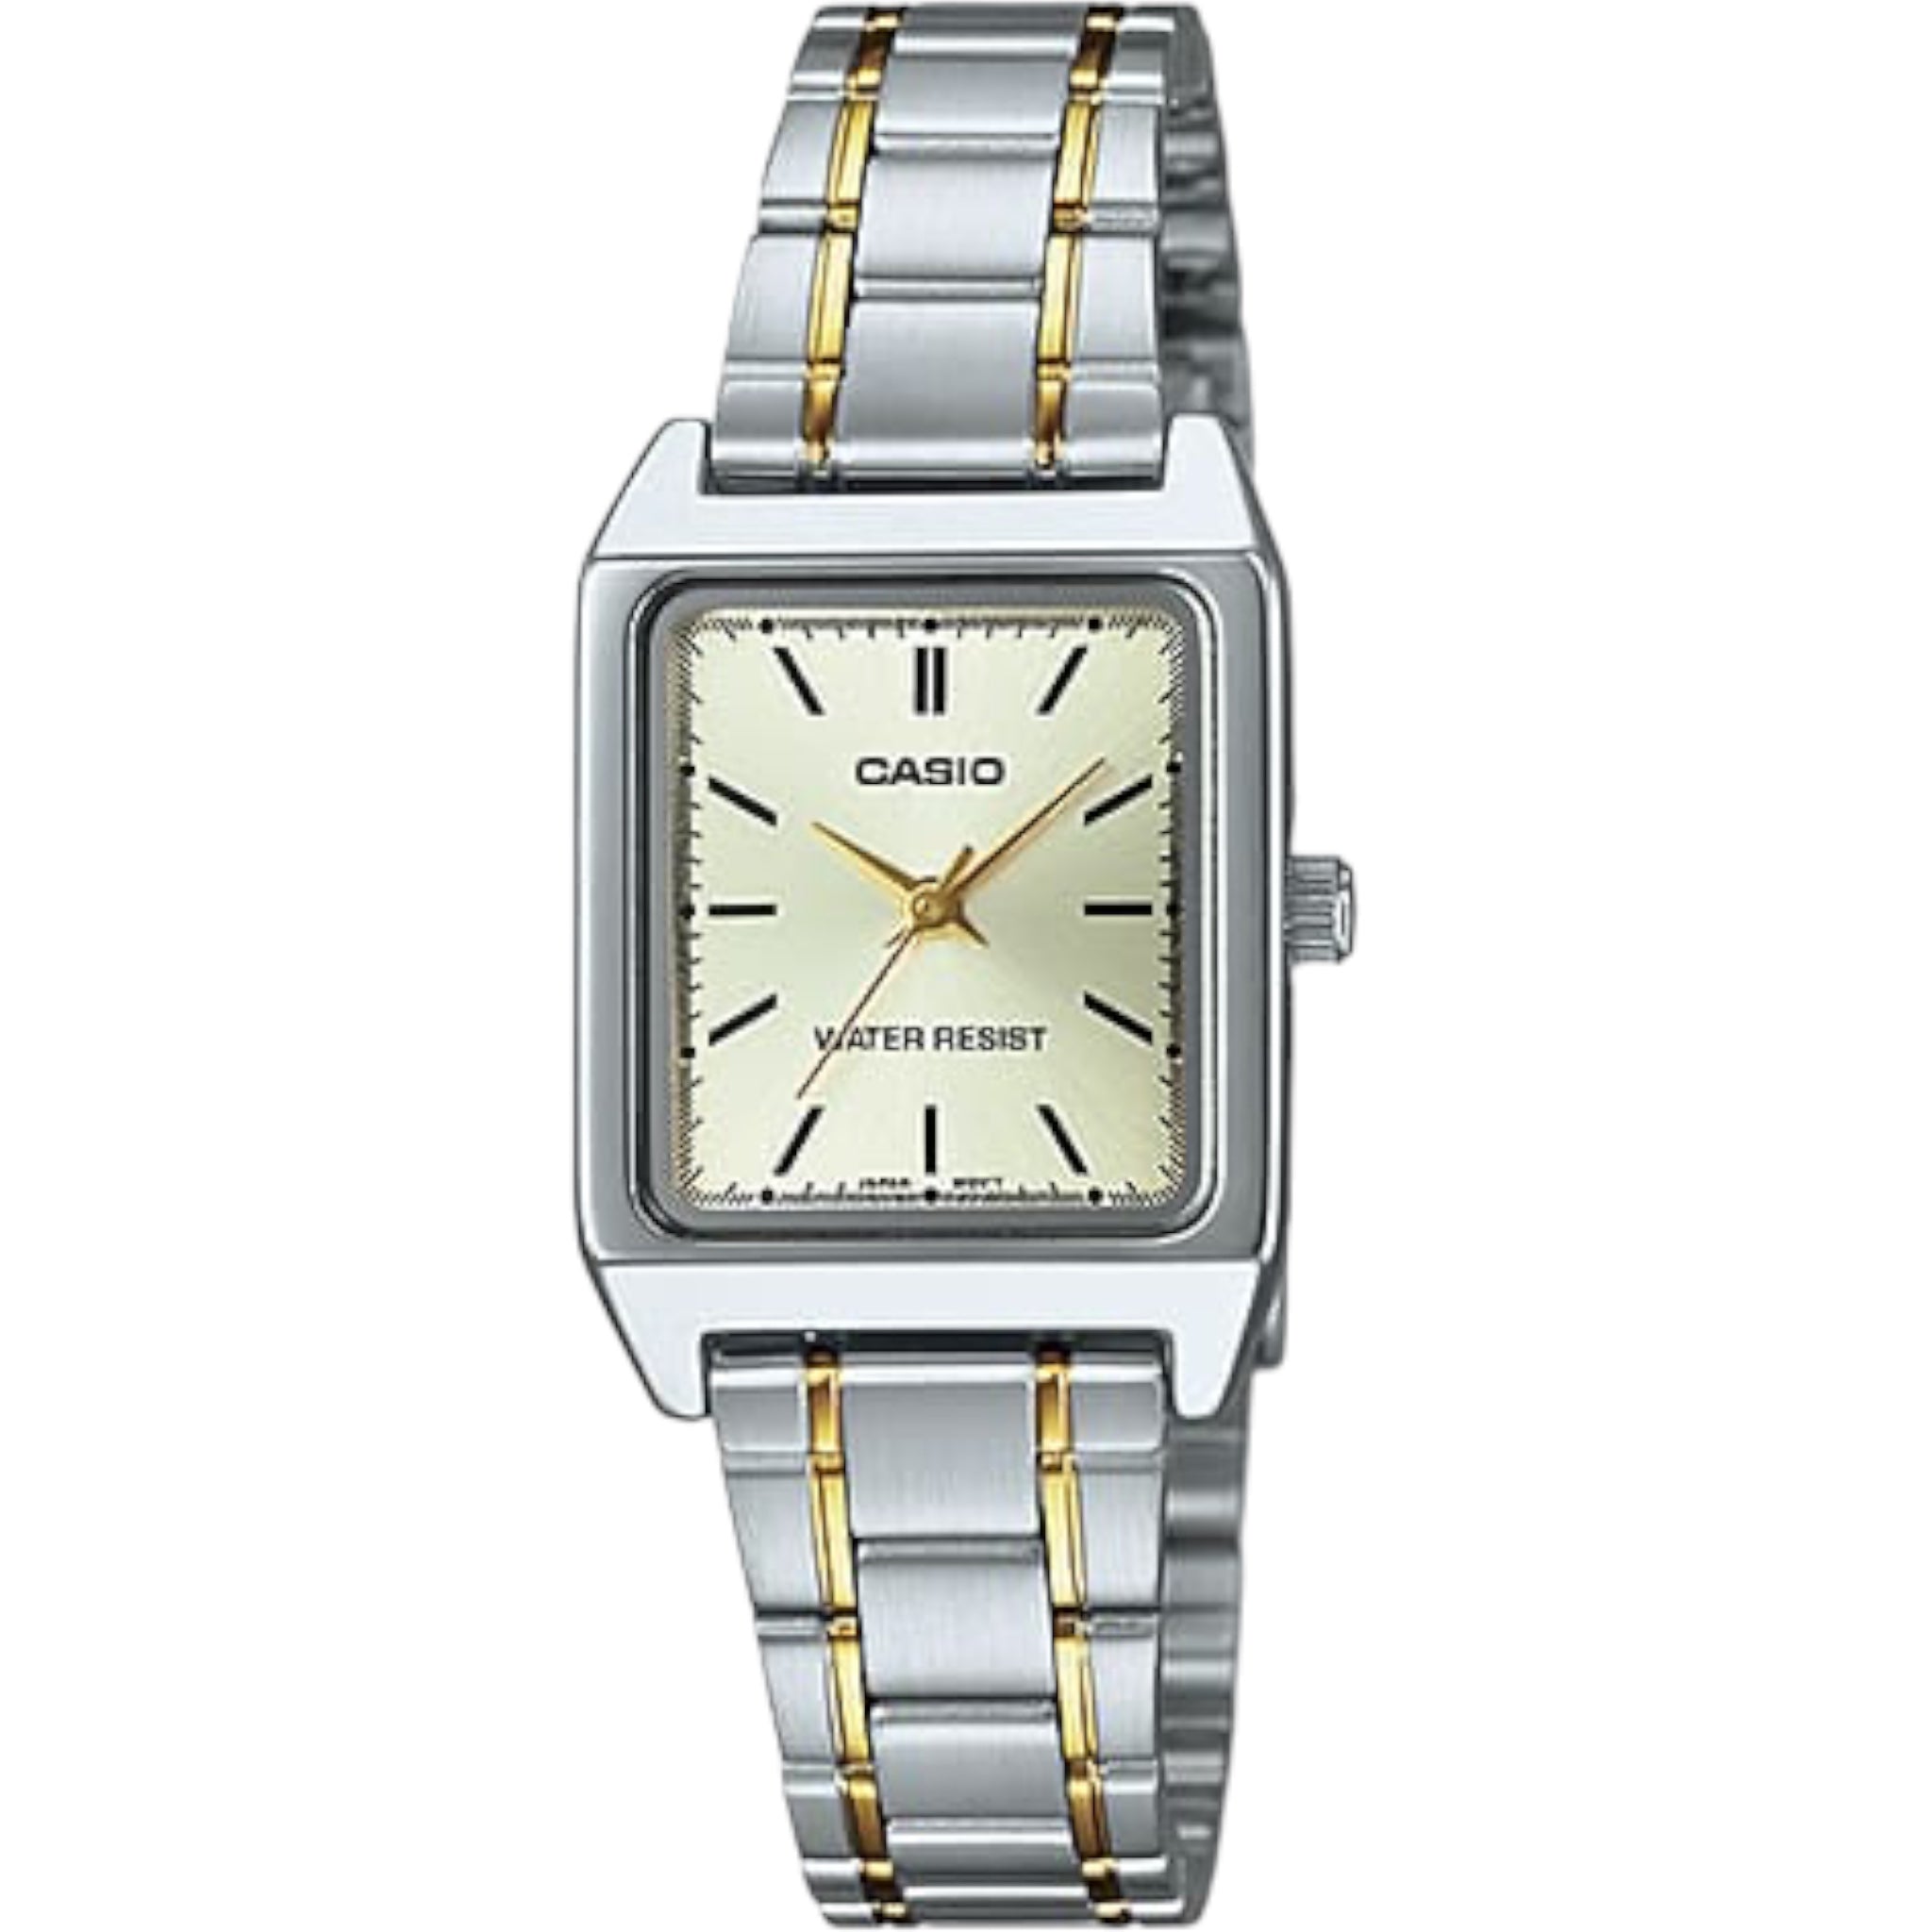 Casio Tank Women's Watch LTP-V007SG-9E Silver and Gold